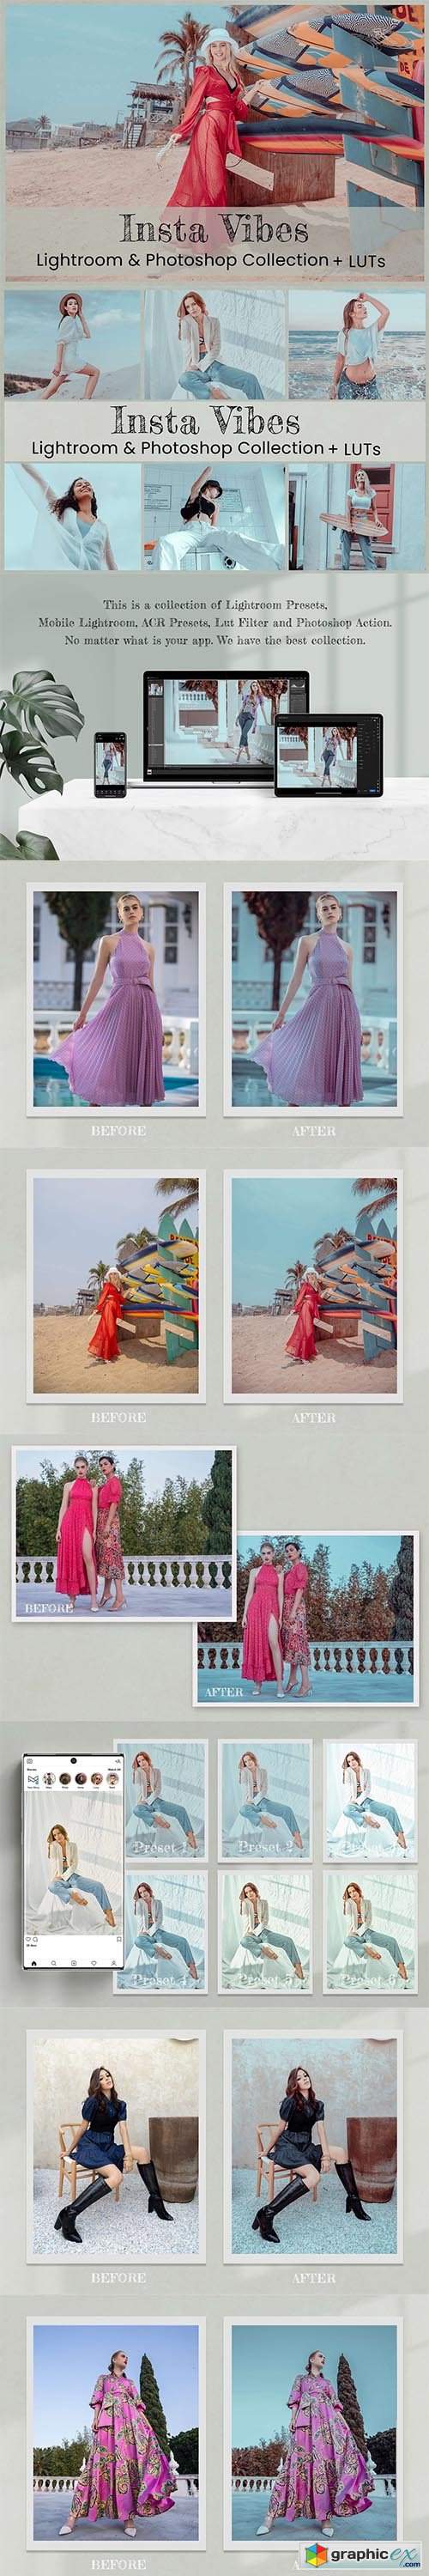 Insta Vibes Photoshop Actions LUTs 